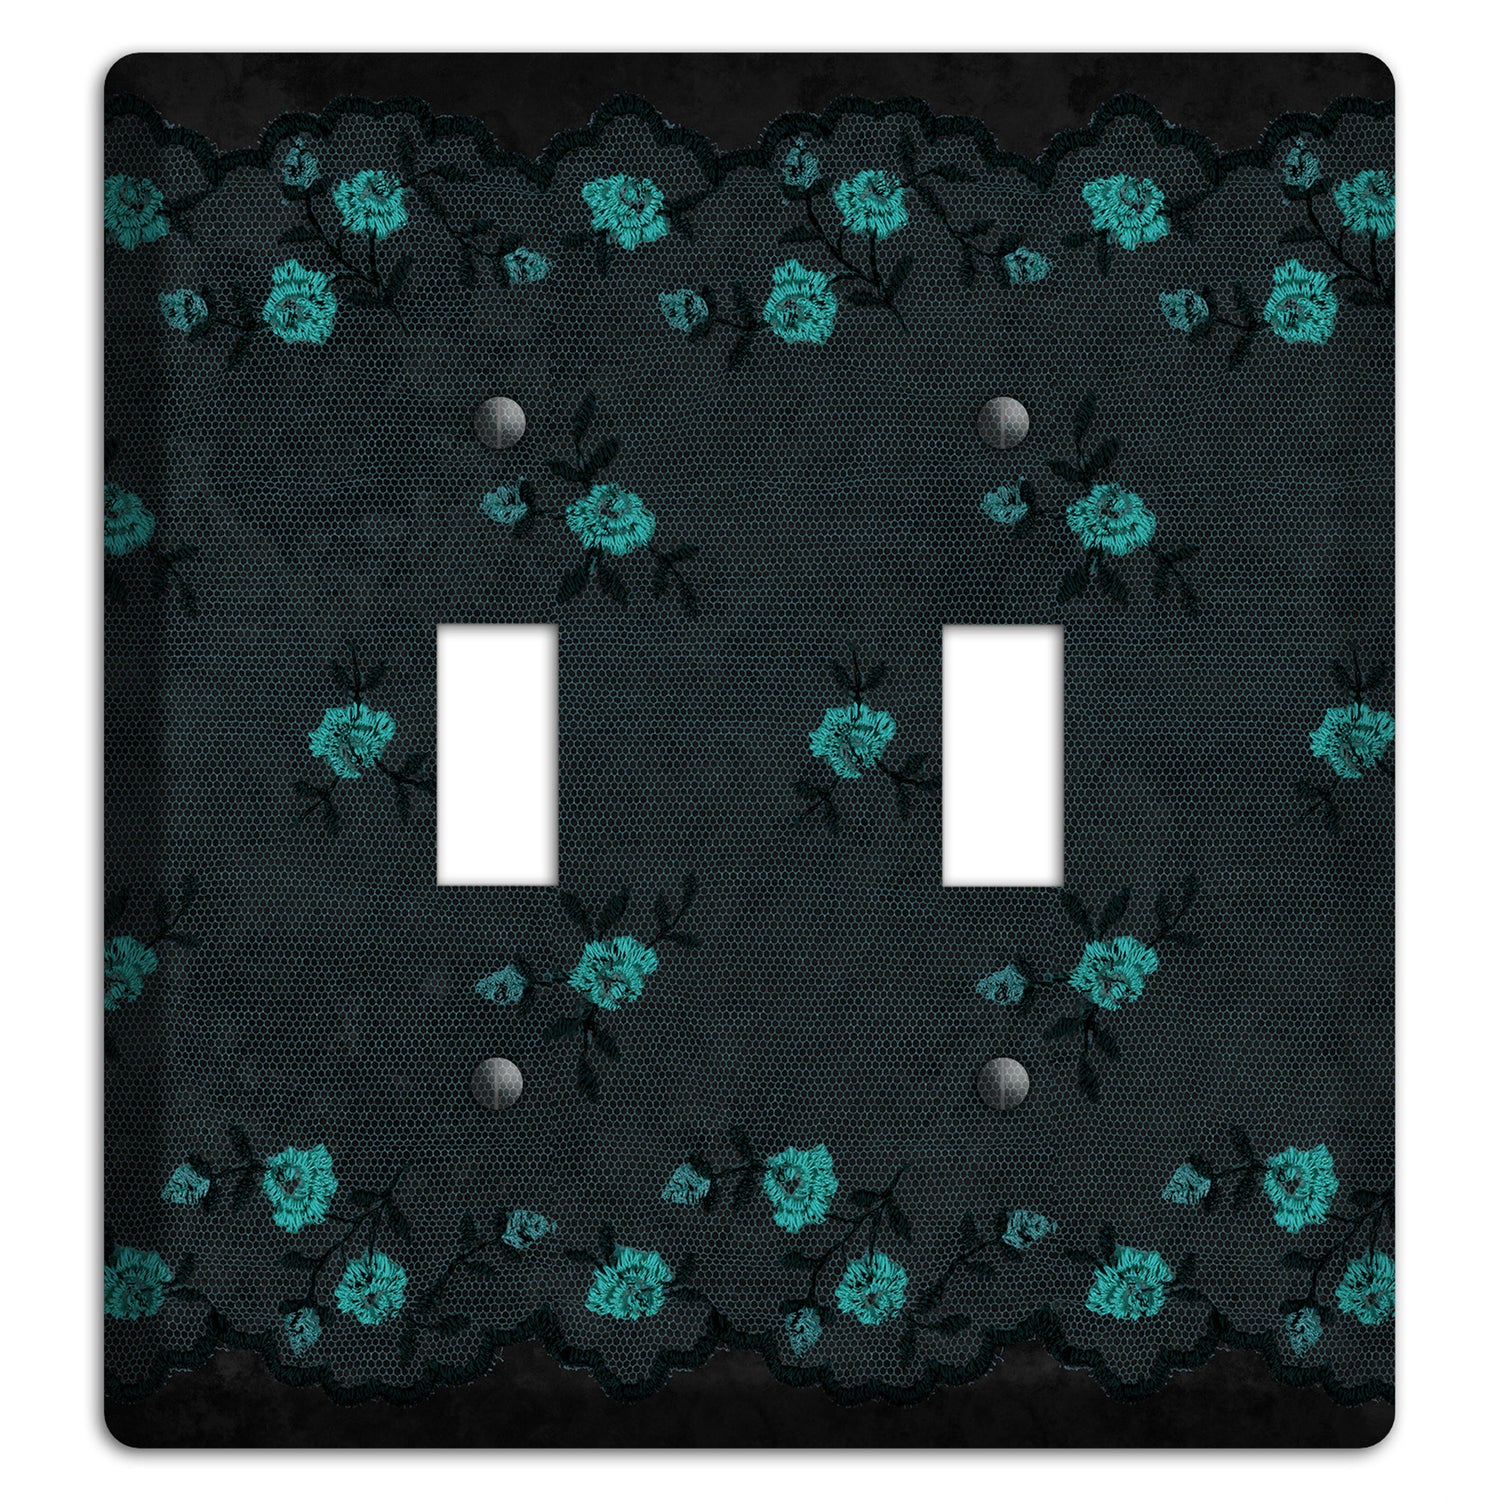 Embroidered Floral Black 2 Toggle Wallplate